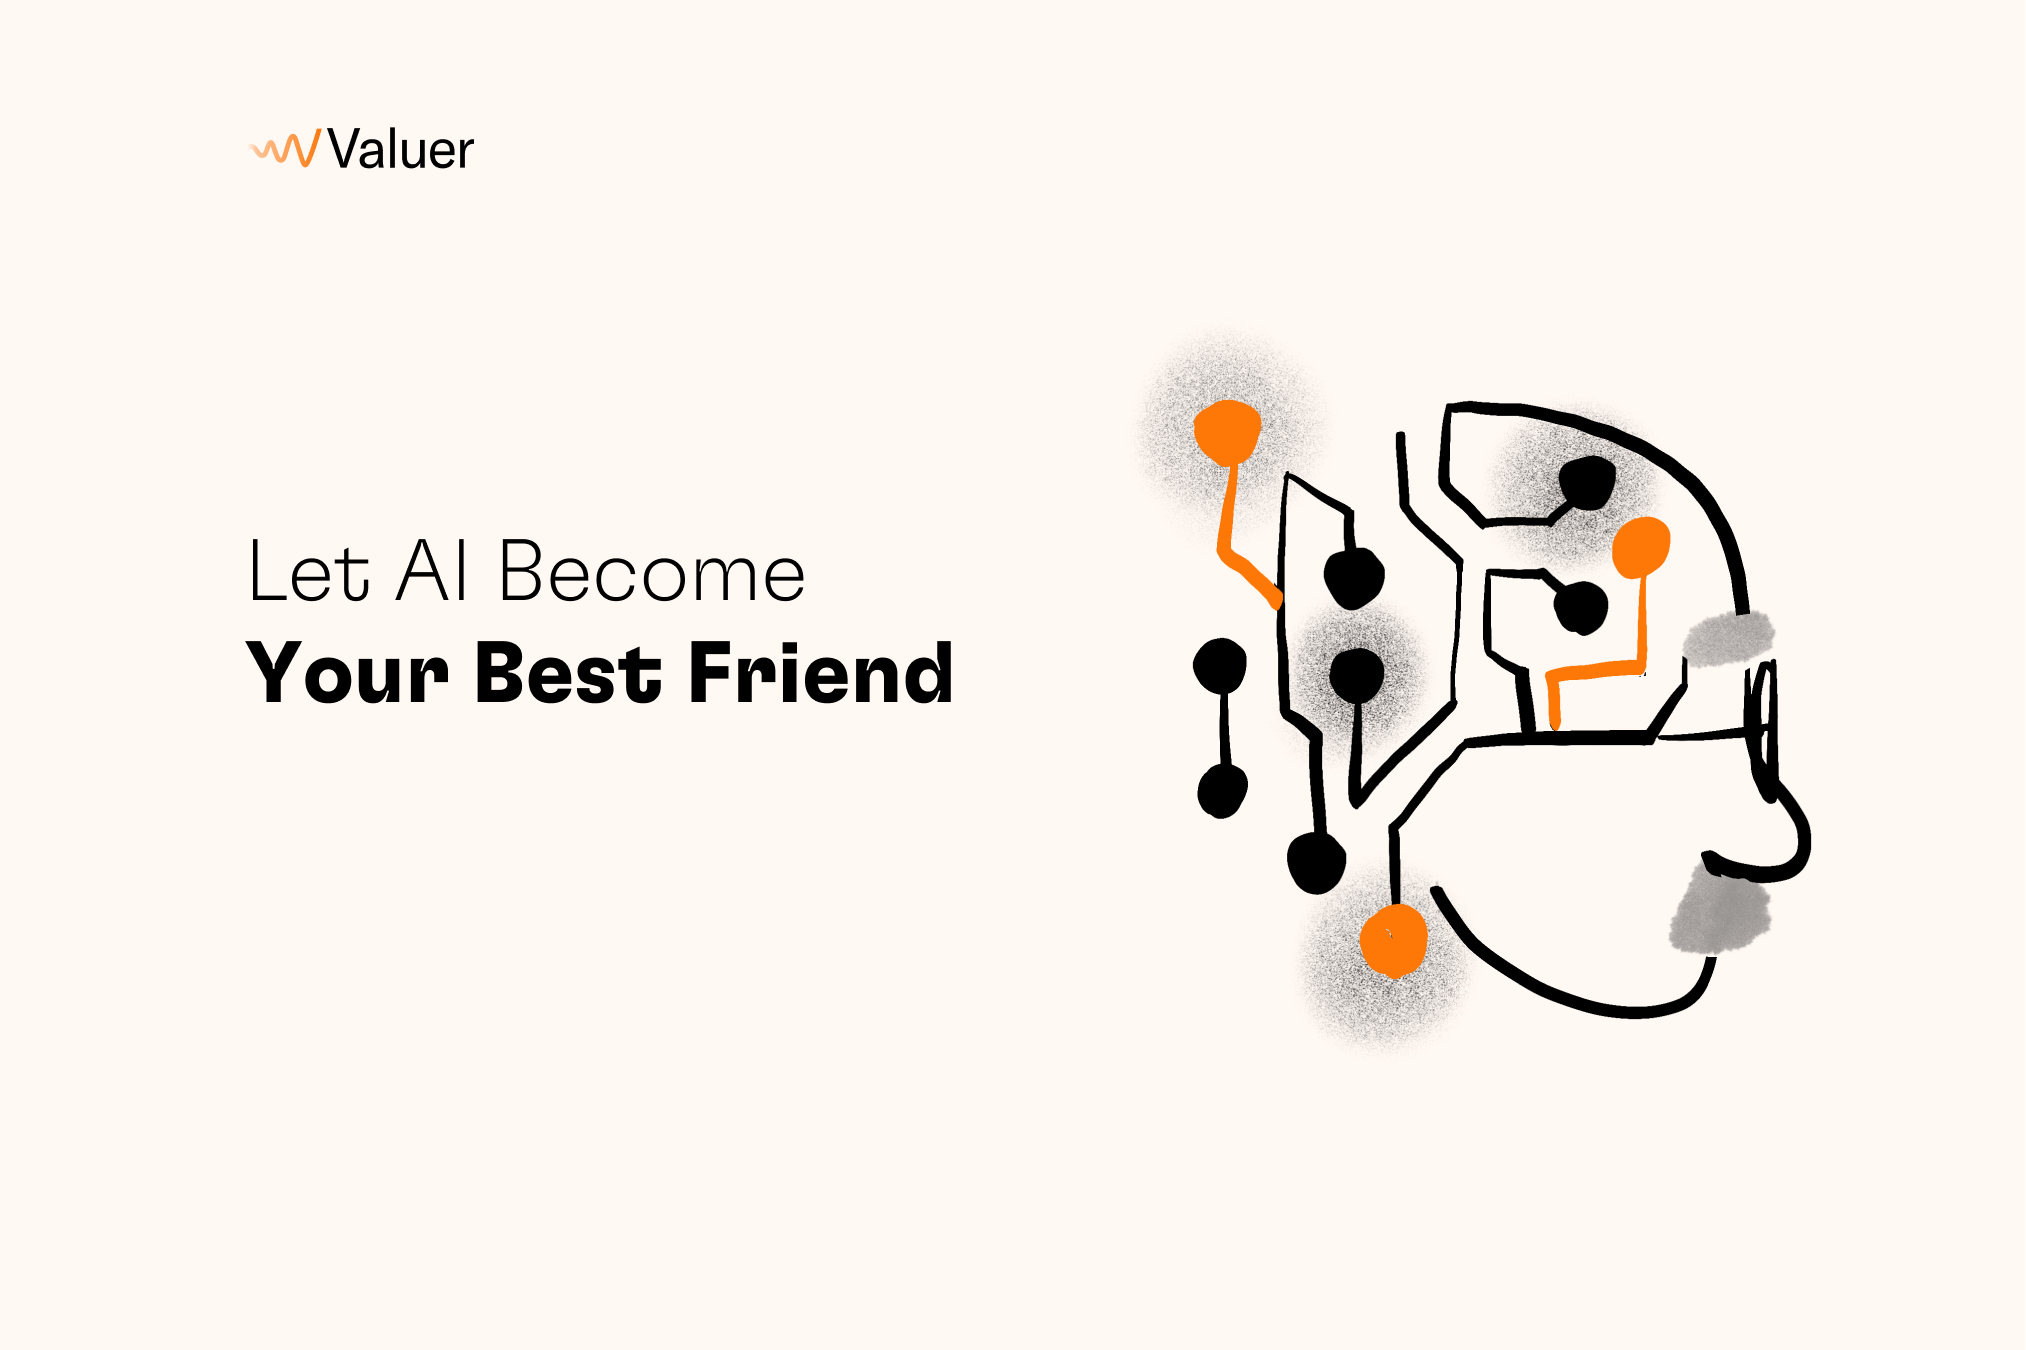 Let AI become your best friend